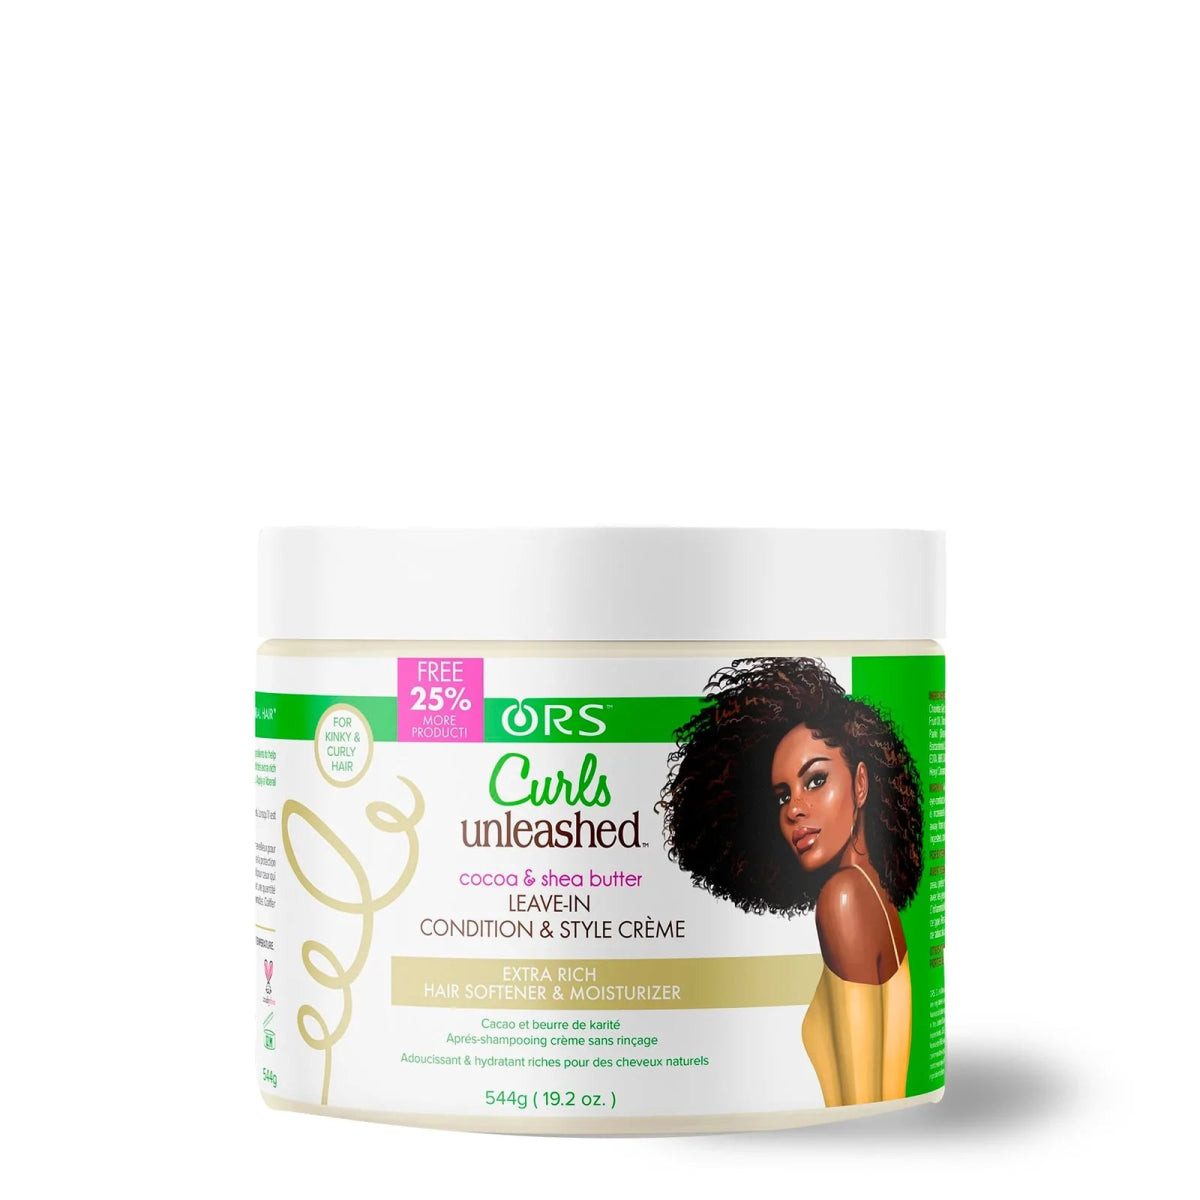 ORS Curls Unleashed Cocoa & Shea Butter Leave In Conditioner 16oz - Southwestsix Cosmetics ORS Curls Unleashed Cocoa & Shea Butter Leave In Conditioner 16oz Leave-in Conditioner ORS Southwestsix Cosmetics ORS Curls Unleashed Cocoa & Shea Butter Leave In Conditioner 16oz